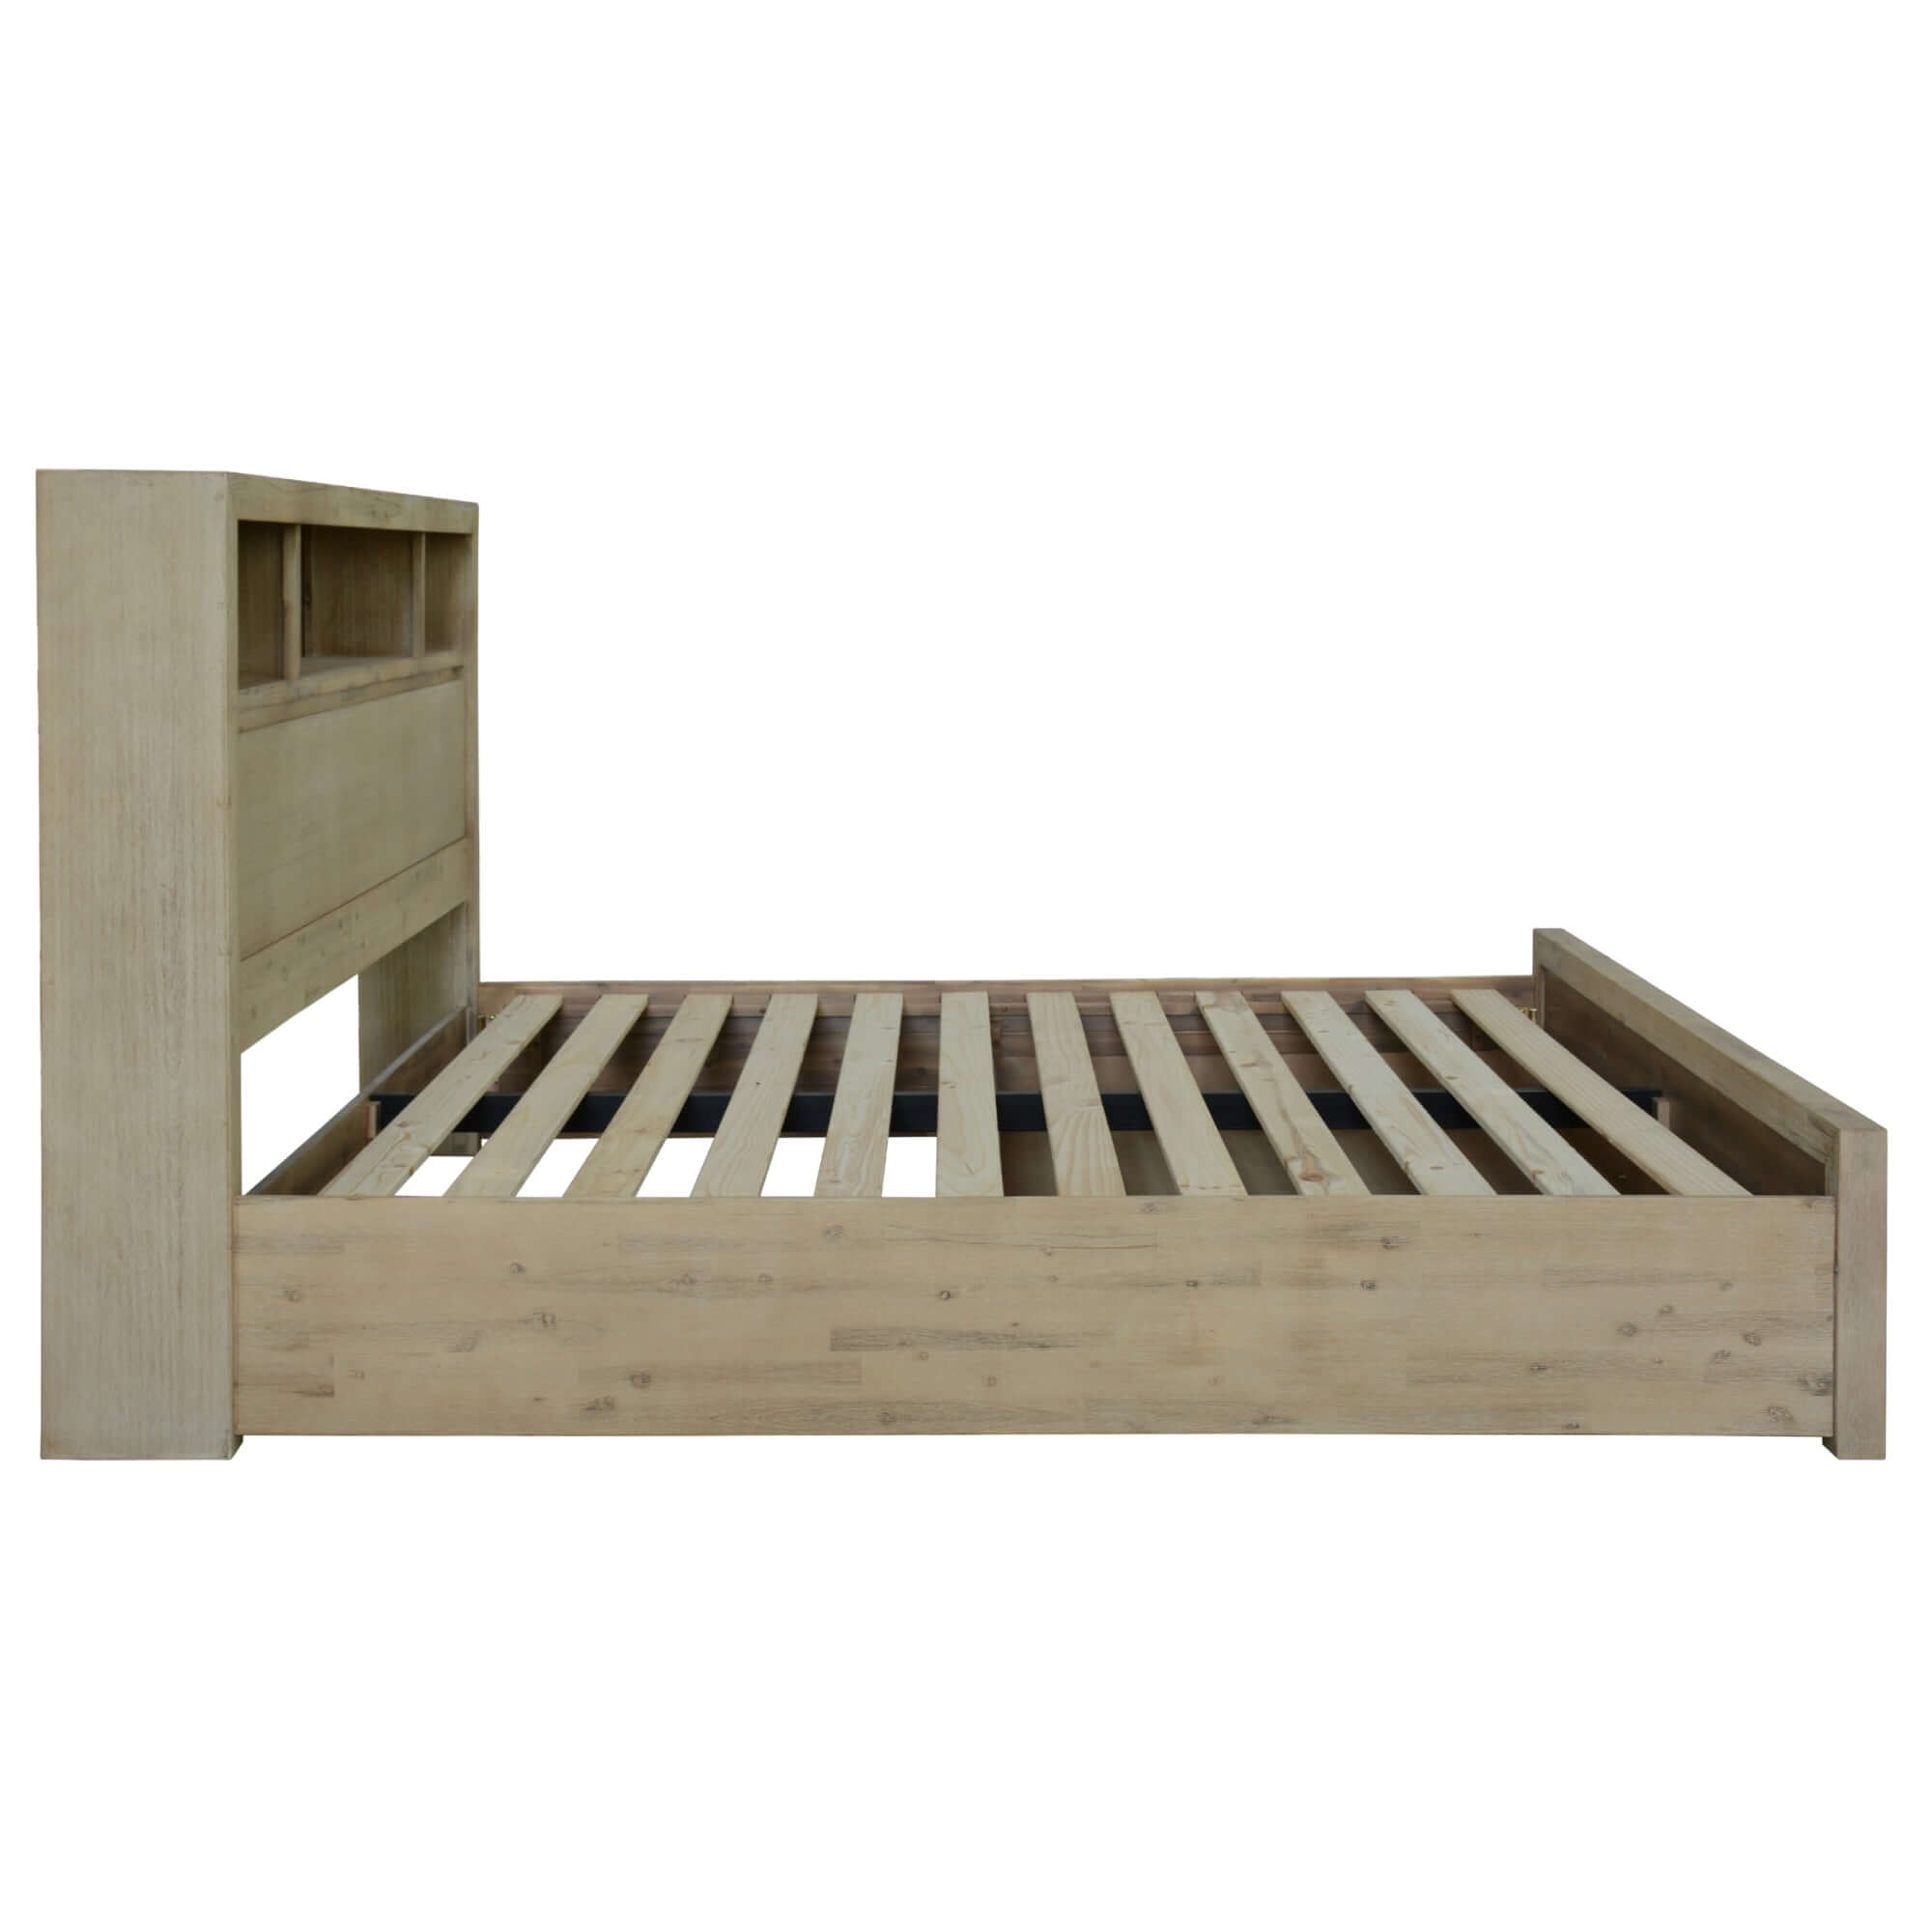 Queen Size Brunet Bed Frame with Storage-Upinteriors